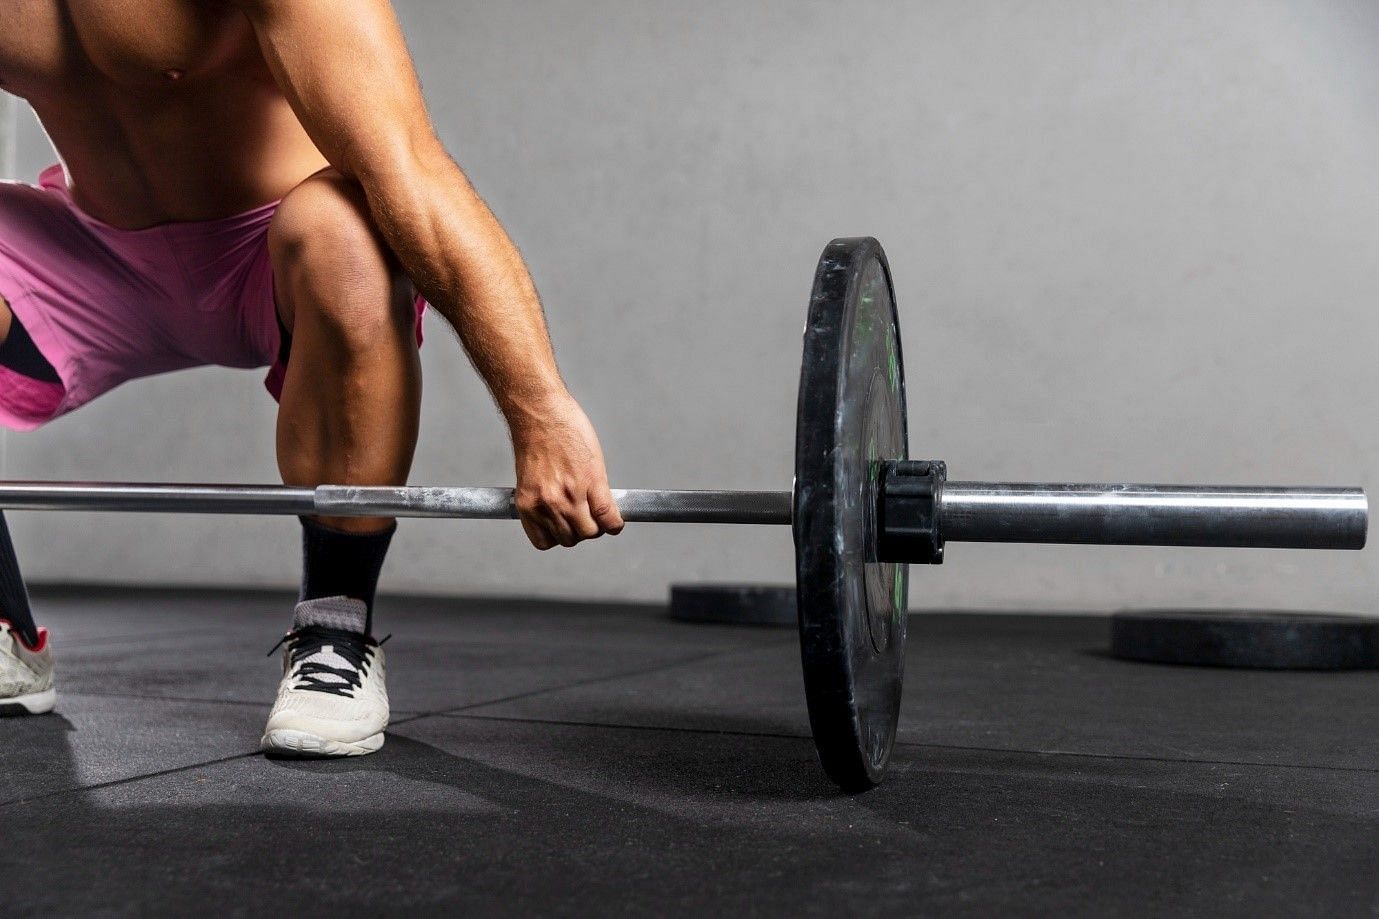 Including barbell row in your workout routine? Here are the benefits of it